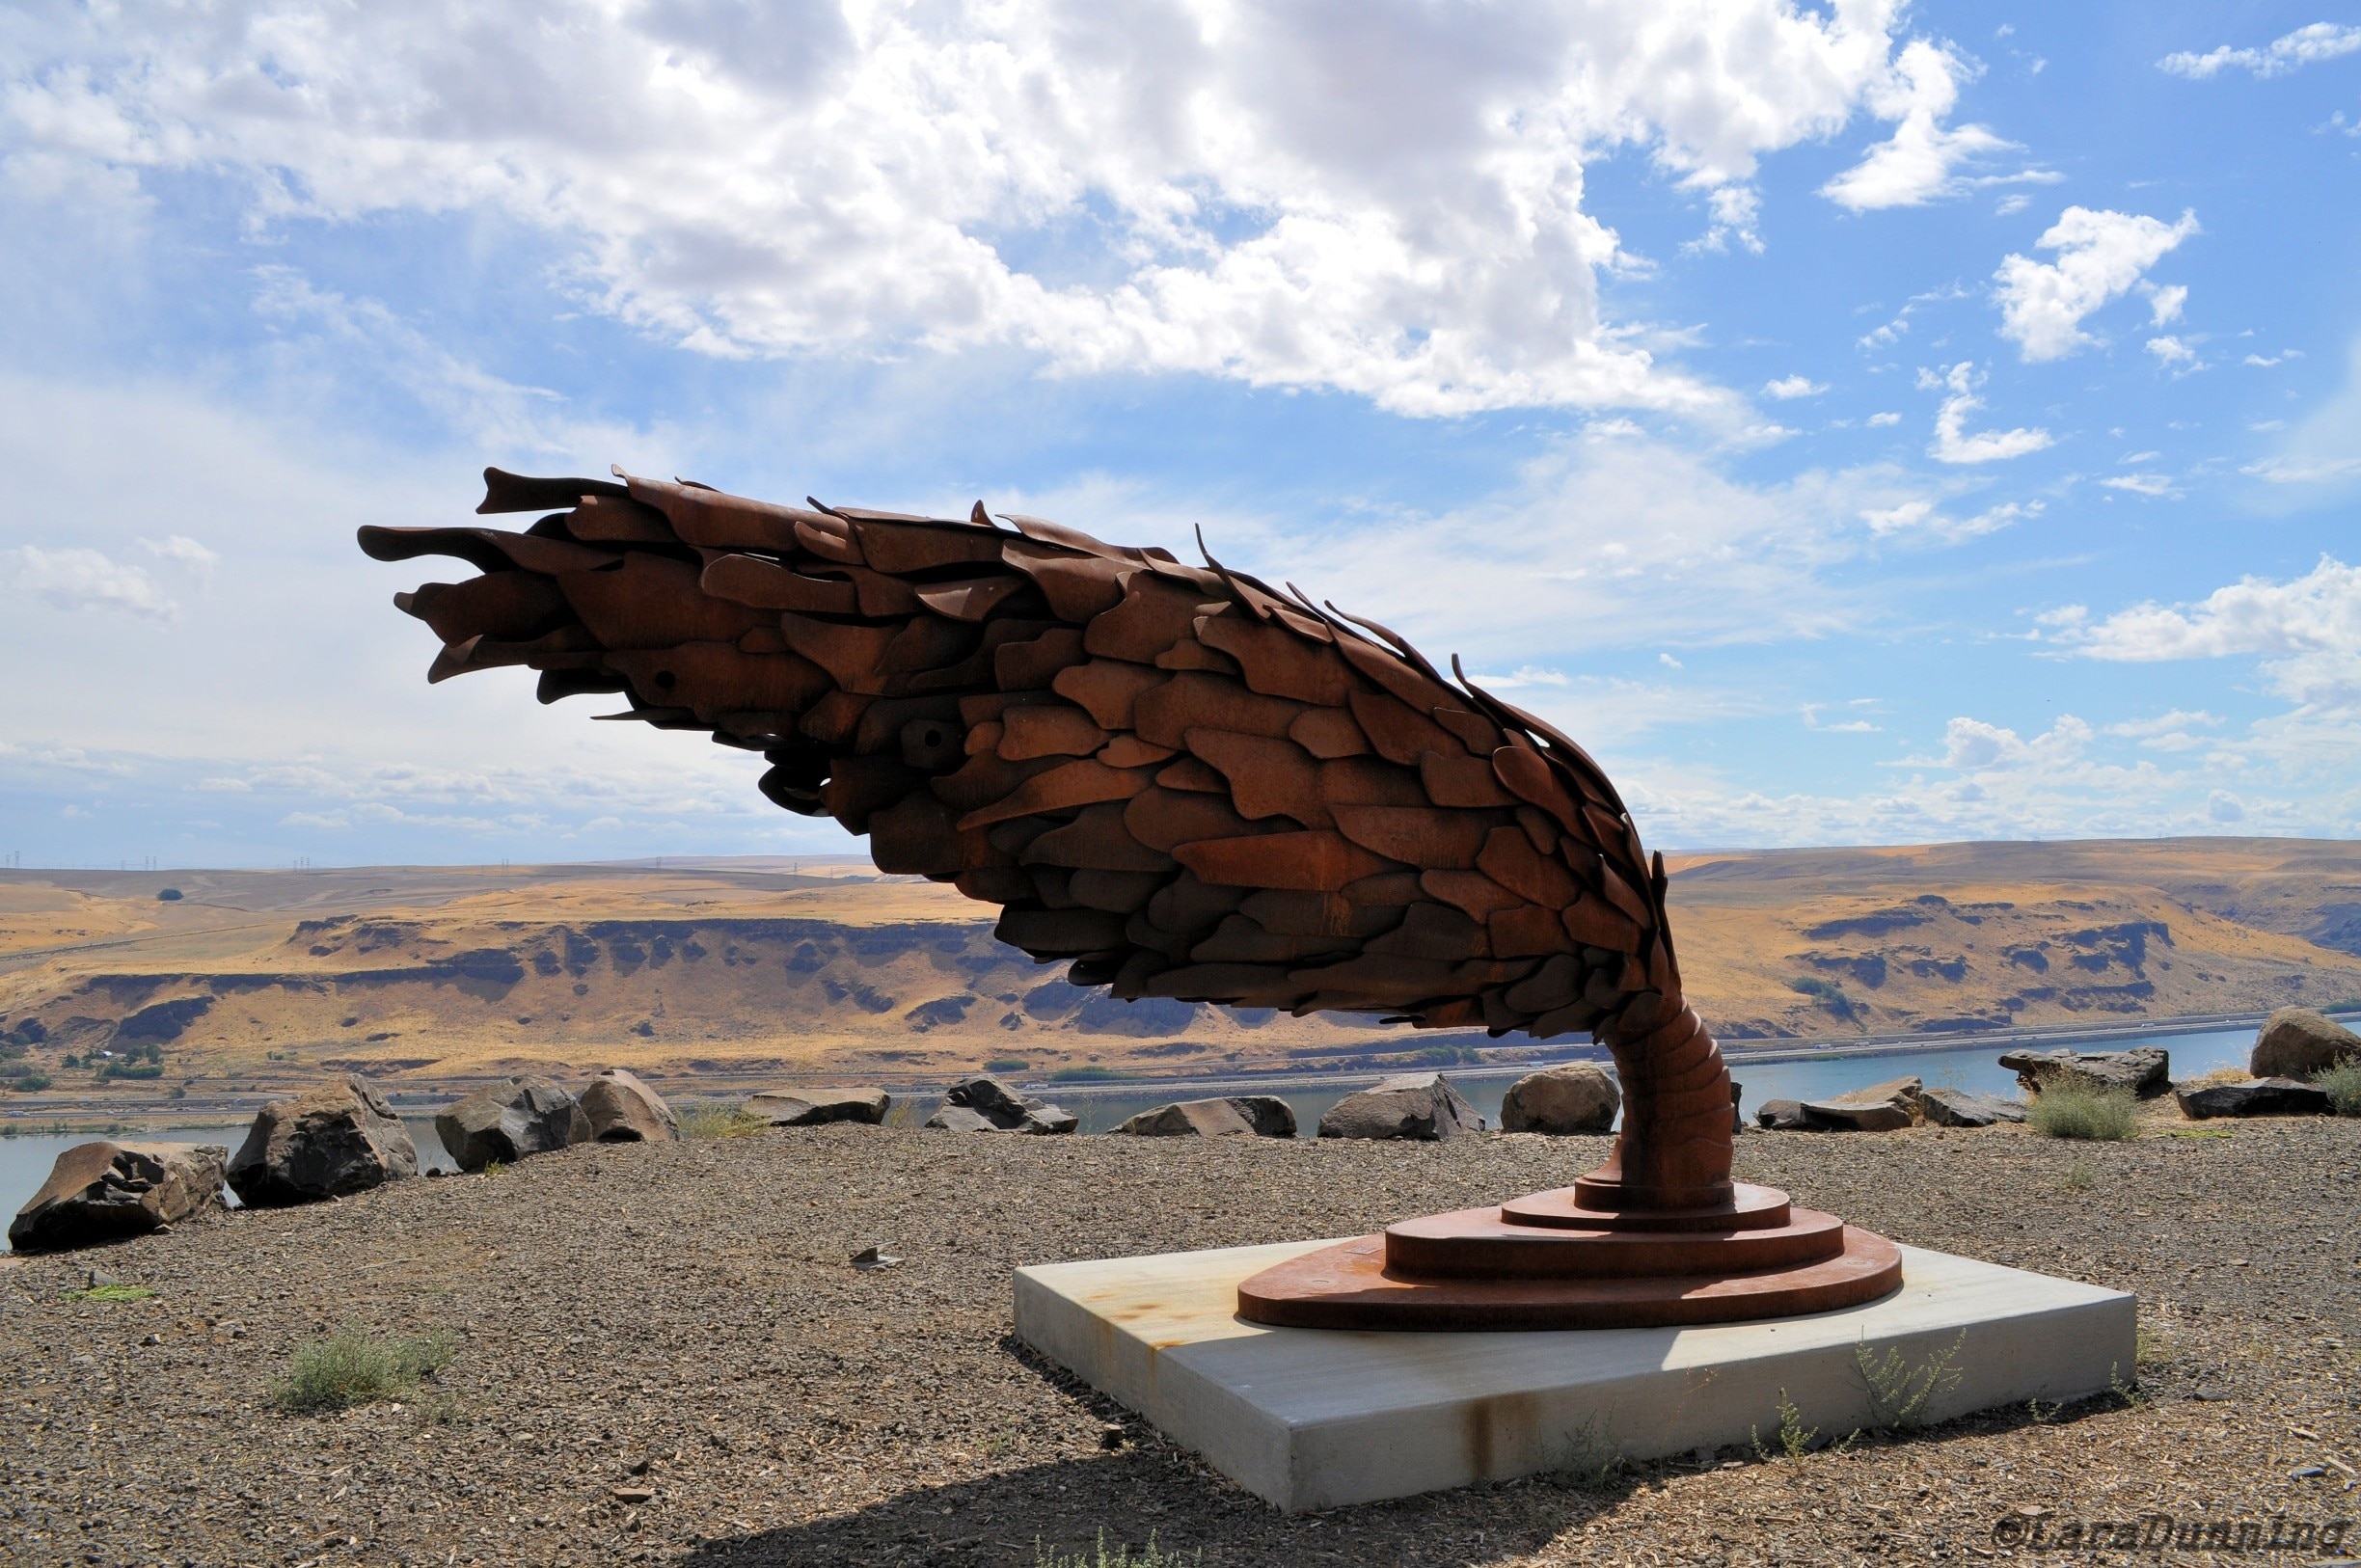 Maryhill Museum of Art is in a stunning location along the Columbia River with jaw-dropping views. Visit the art museum, wander the sculpture grounds, have a picnic in the shade. Enjoy art in all its forms. #explorewashington #art #museum #scenicwa #roadtrip 